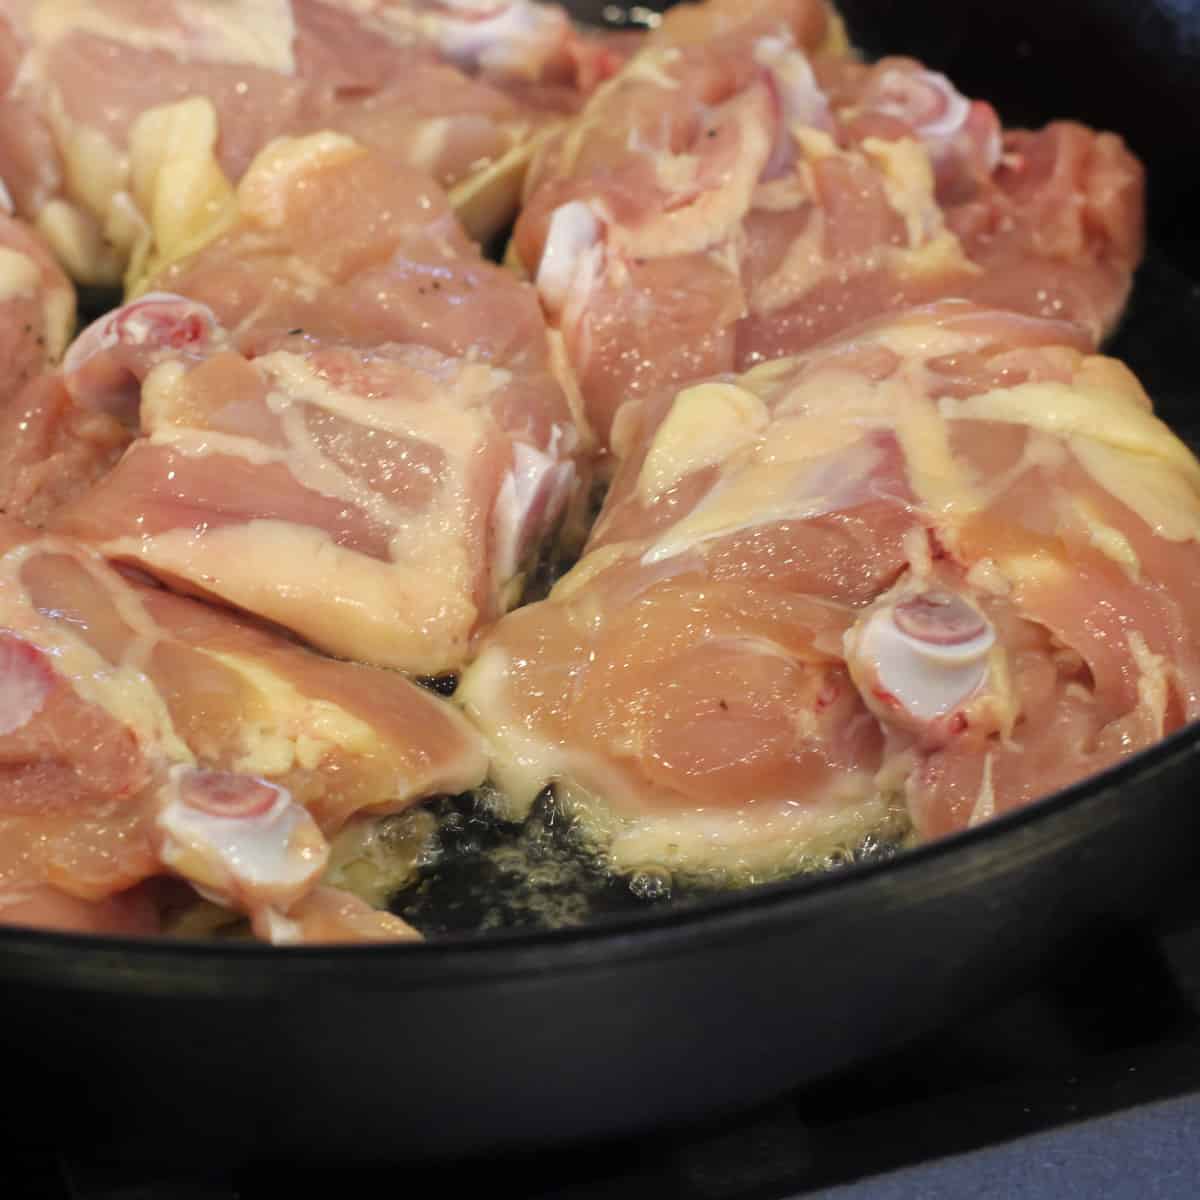 Raw chicken in some hot oil.